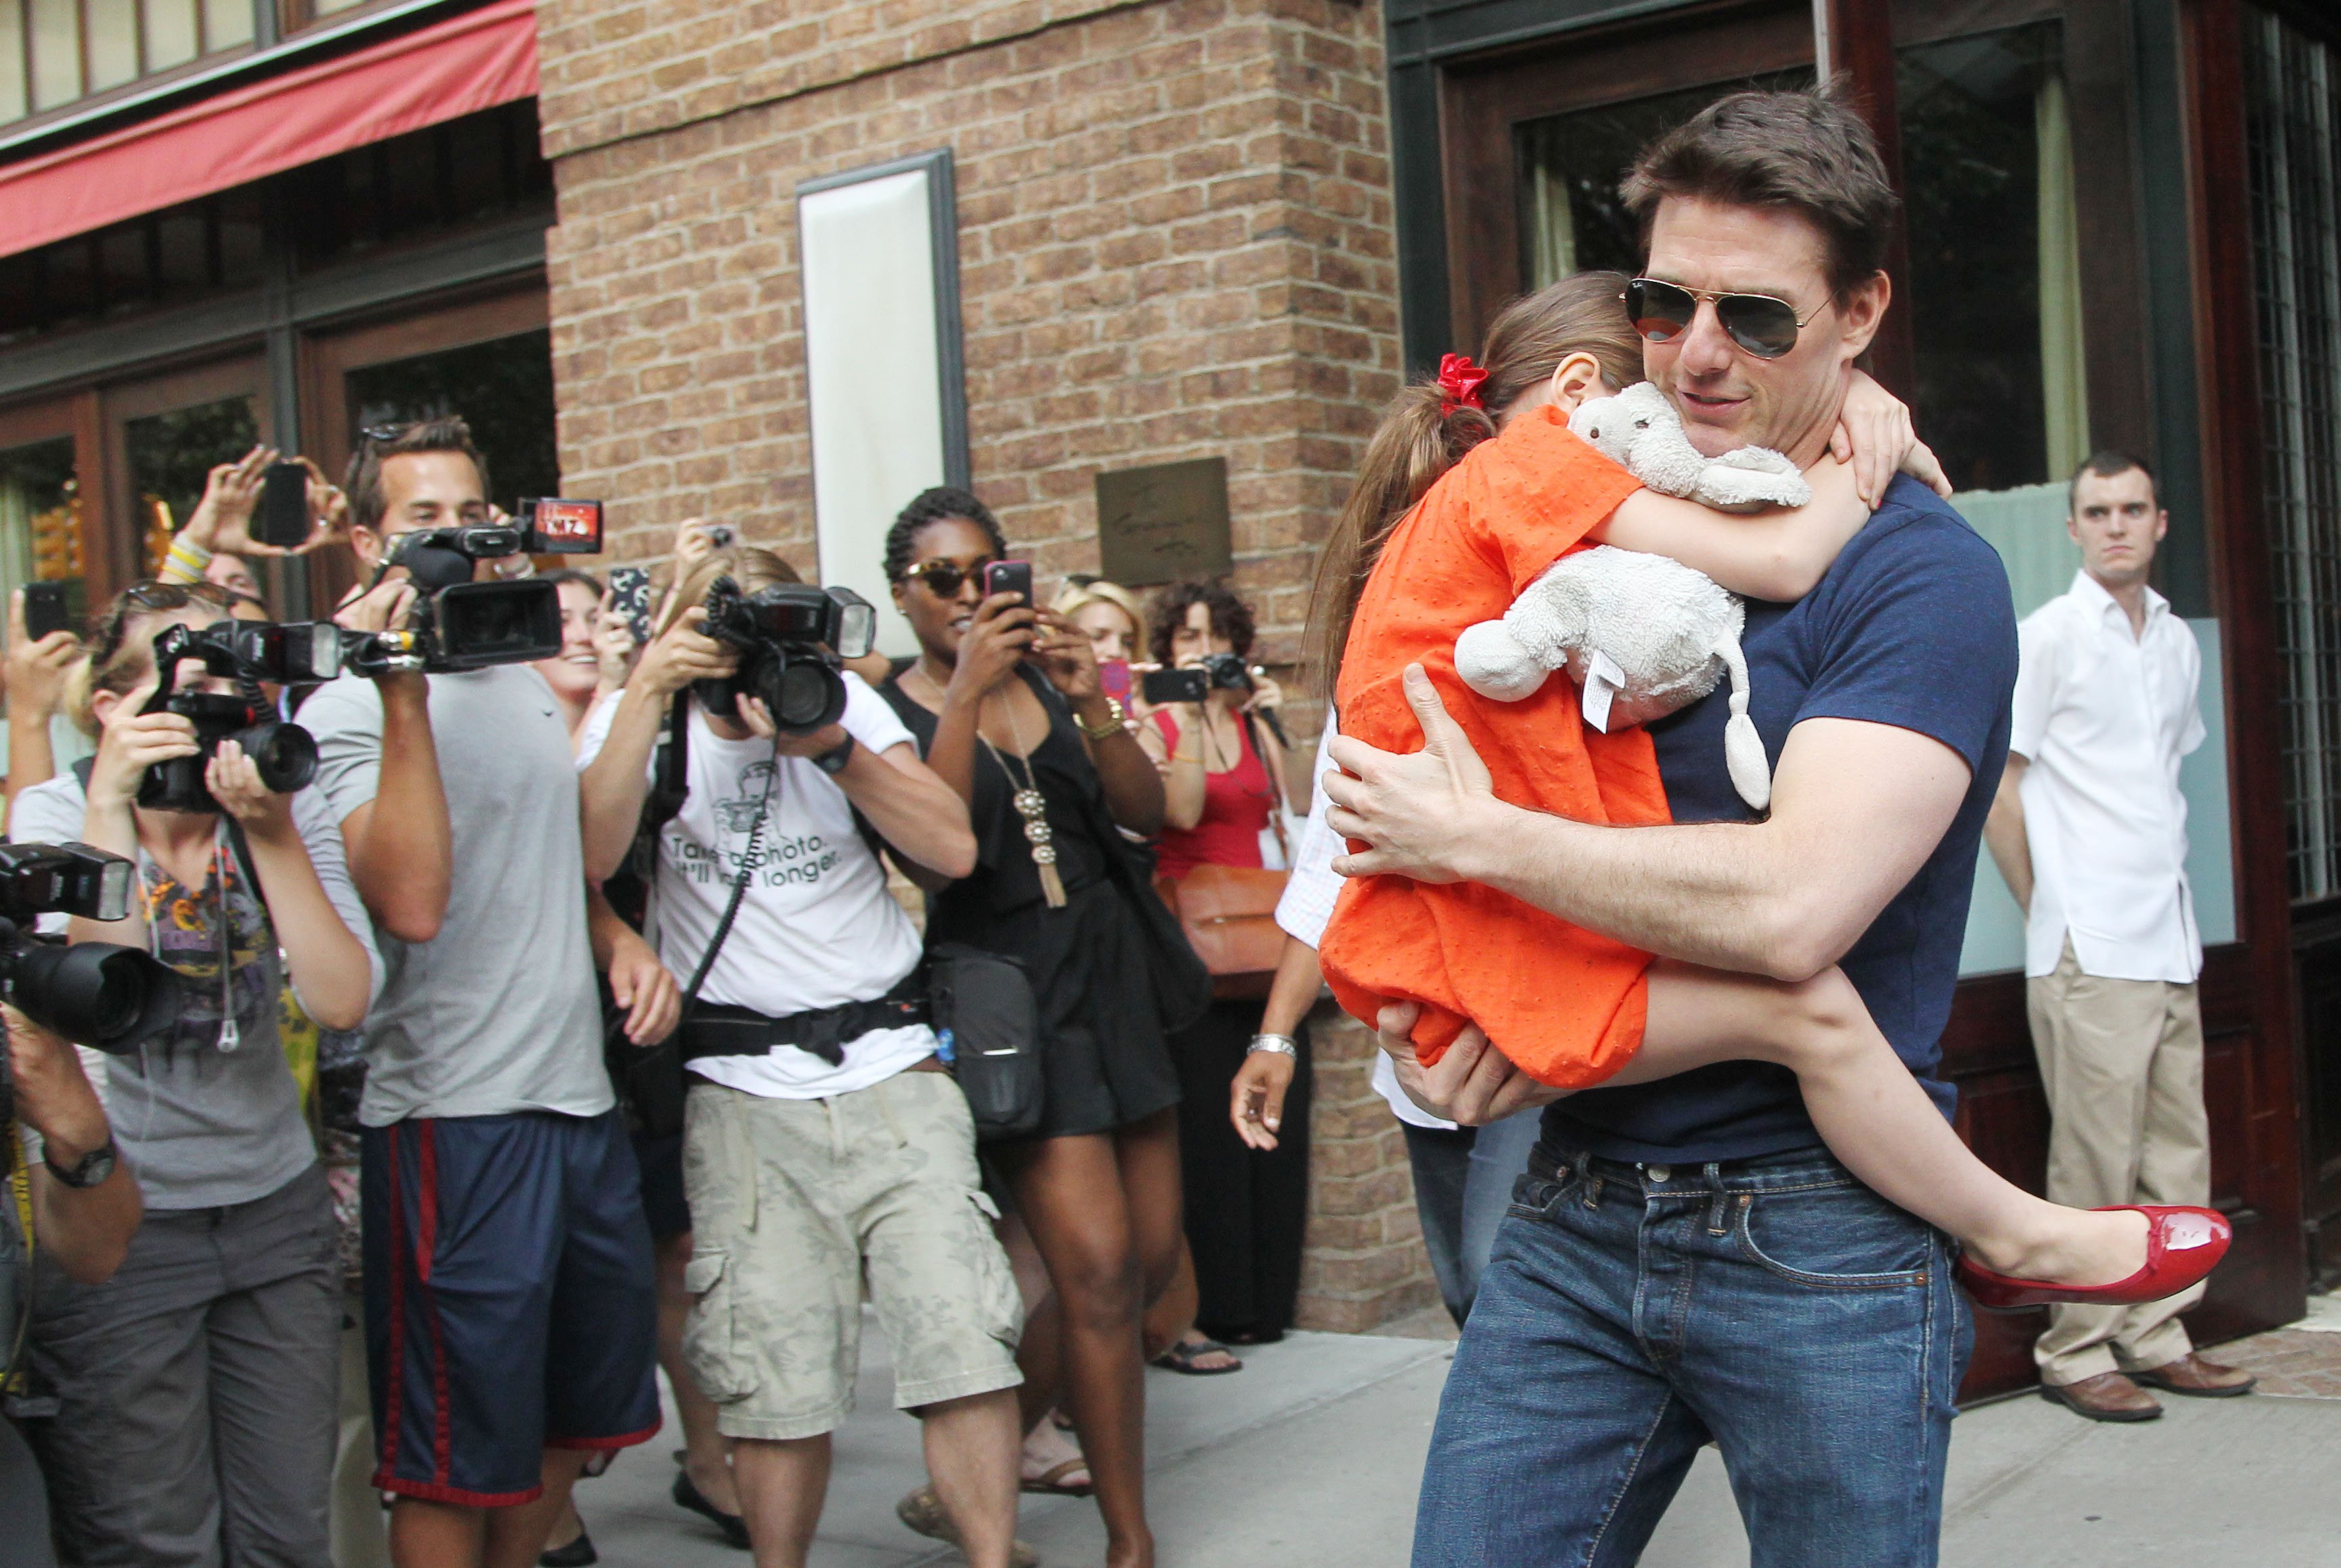 Tom Cruise carries Suri as they exit a building in New York City in 2012. | Source: Getty Images